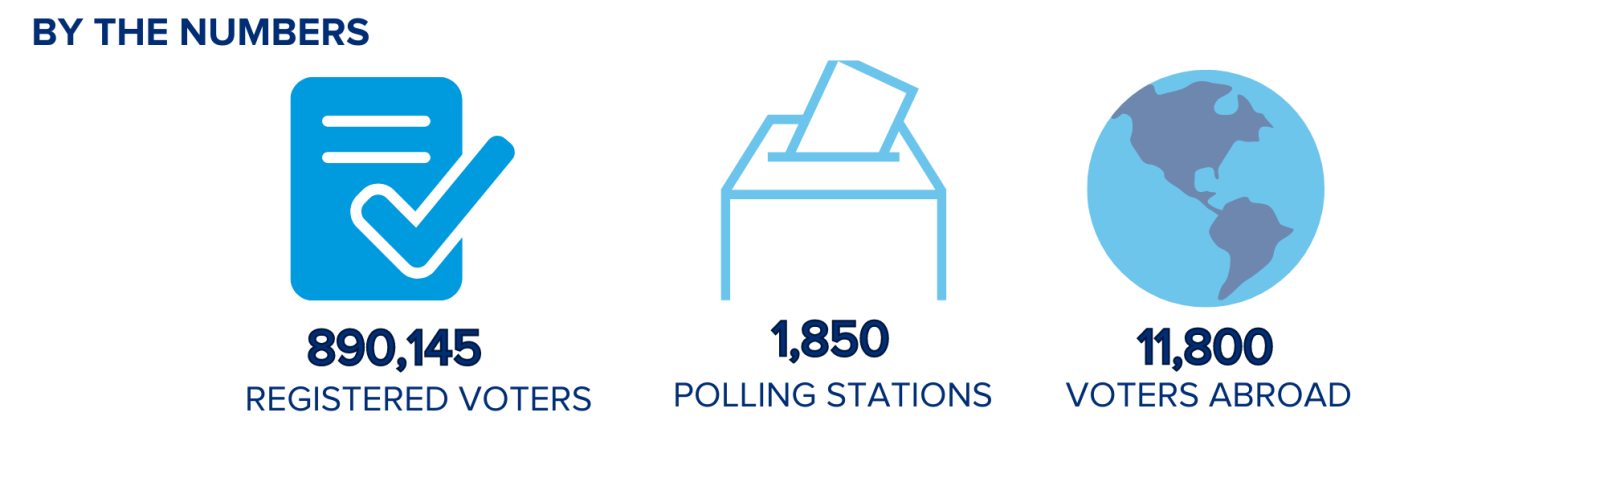 By the numbers 890,145 REGISTERED VOTERS 1,850  POLLING STATIONS  11,800 VOTERS ABROAD 